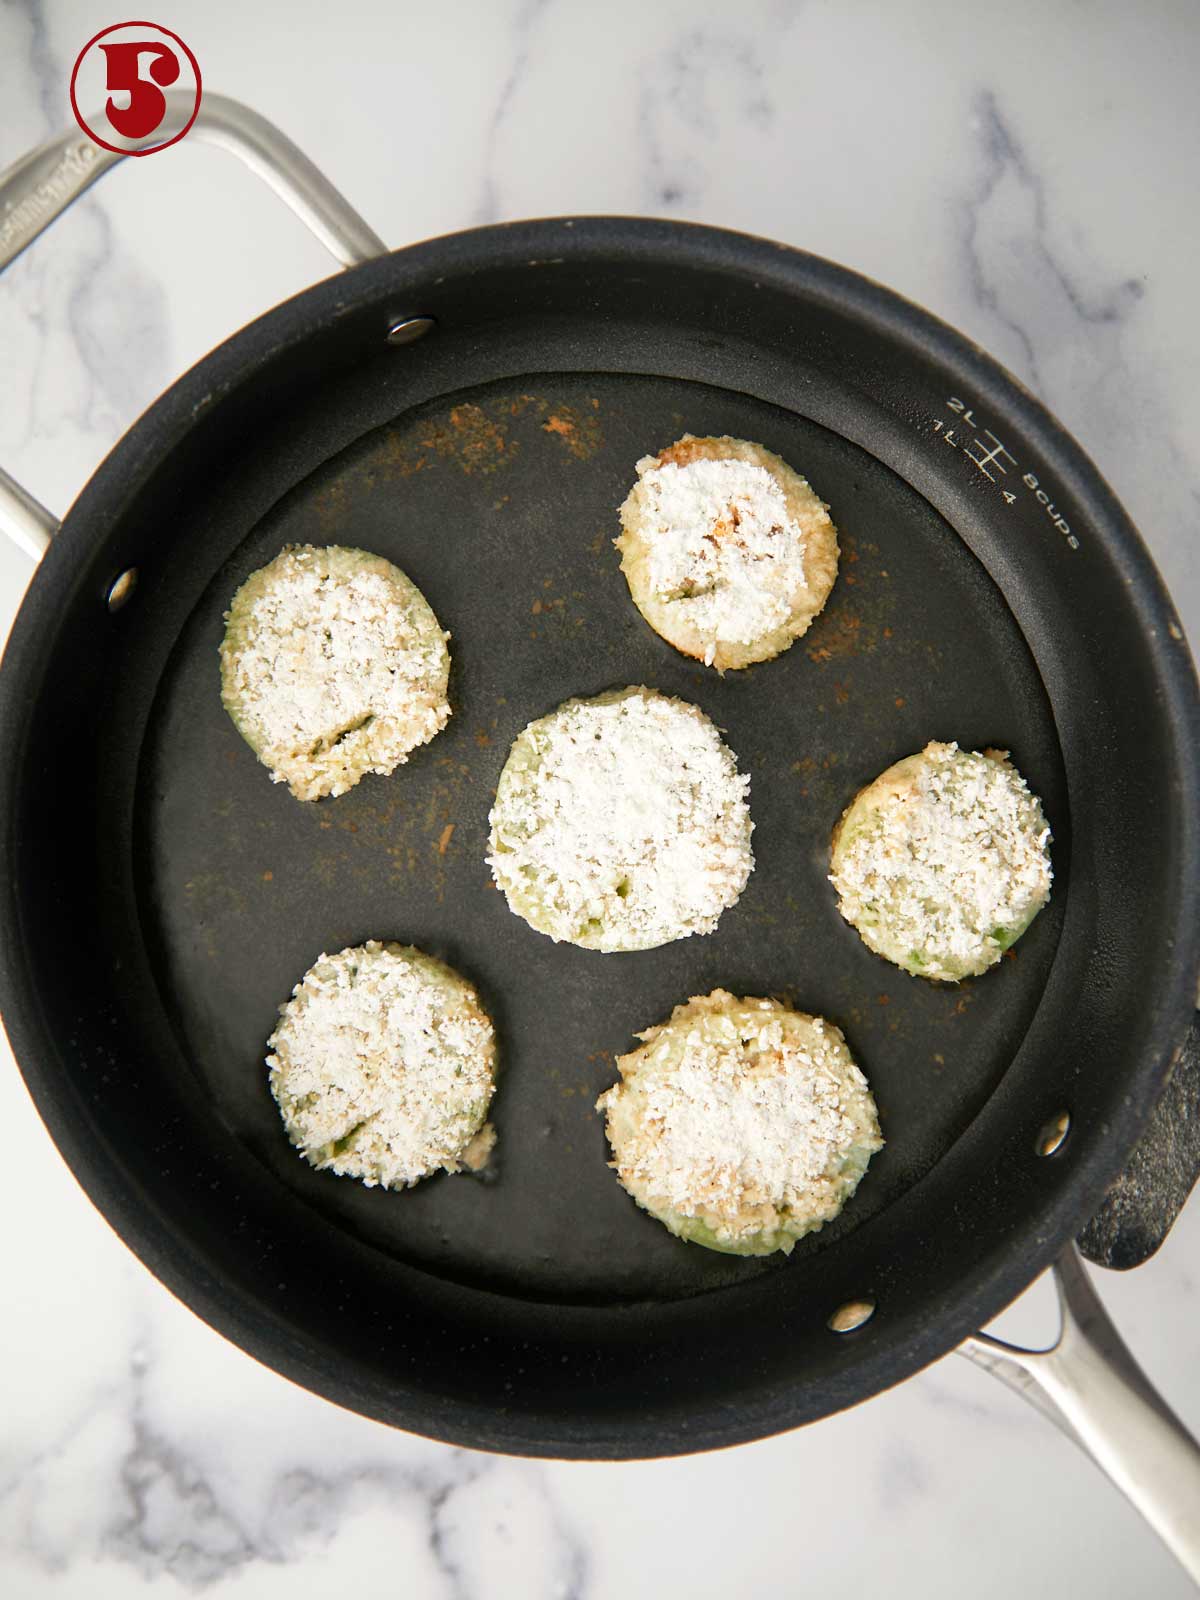 Green tomatoes frying in oil.